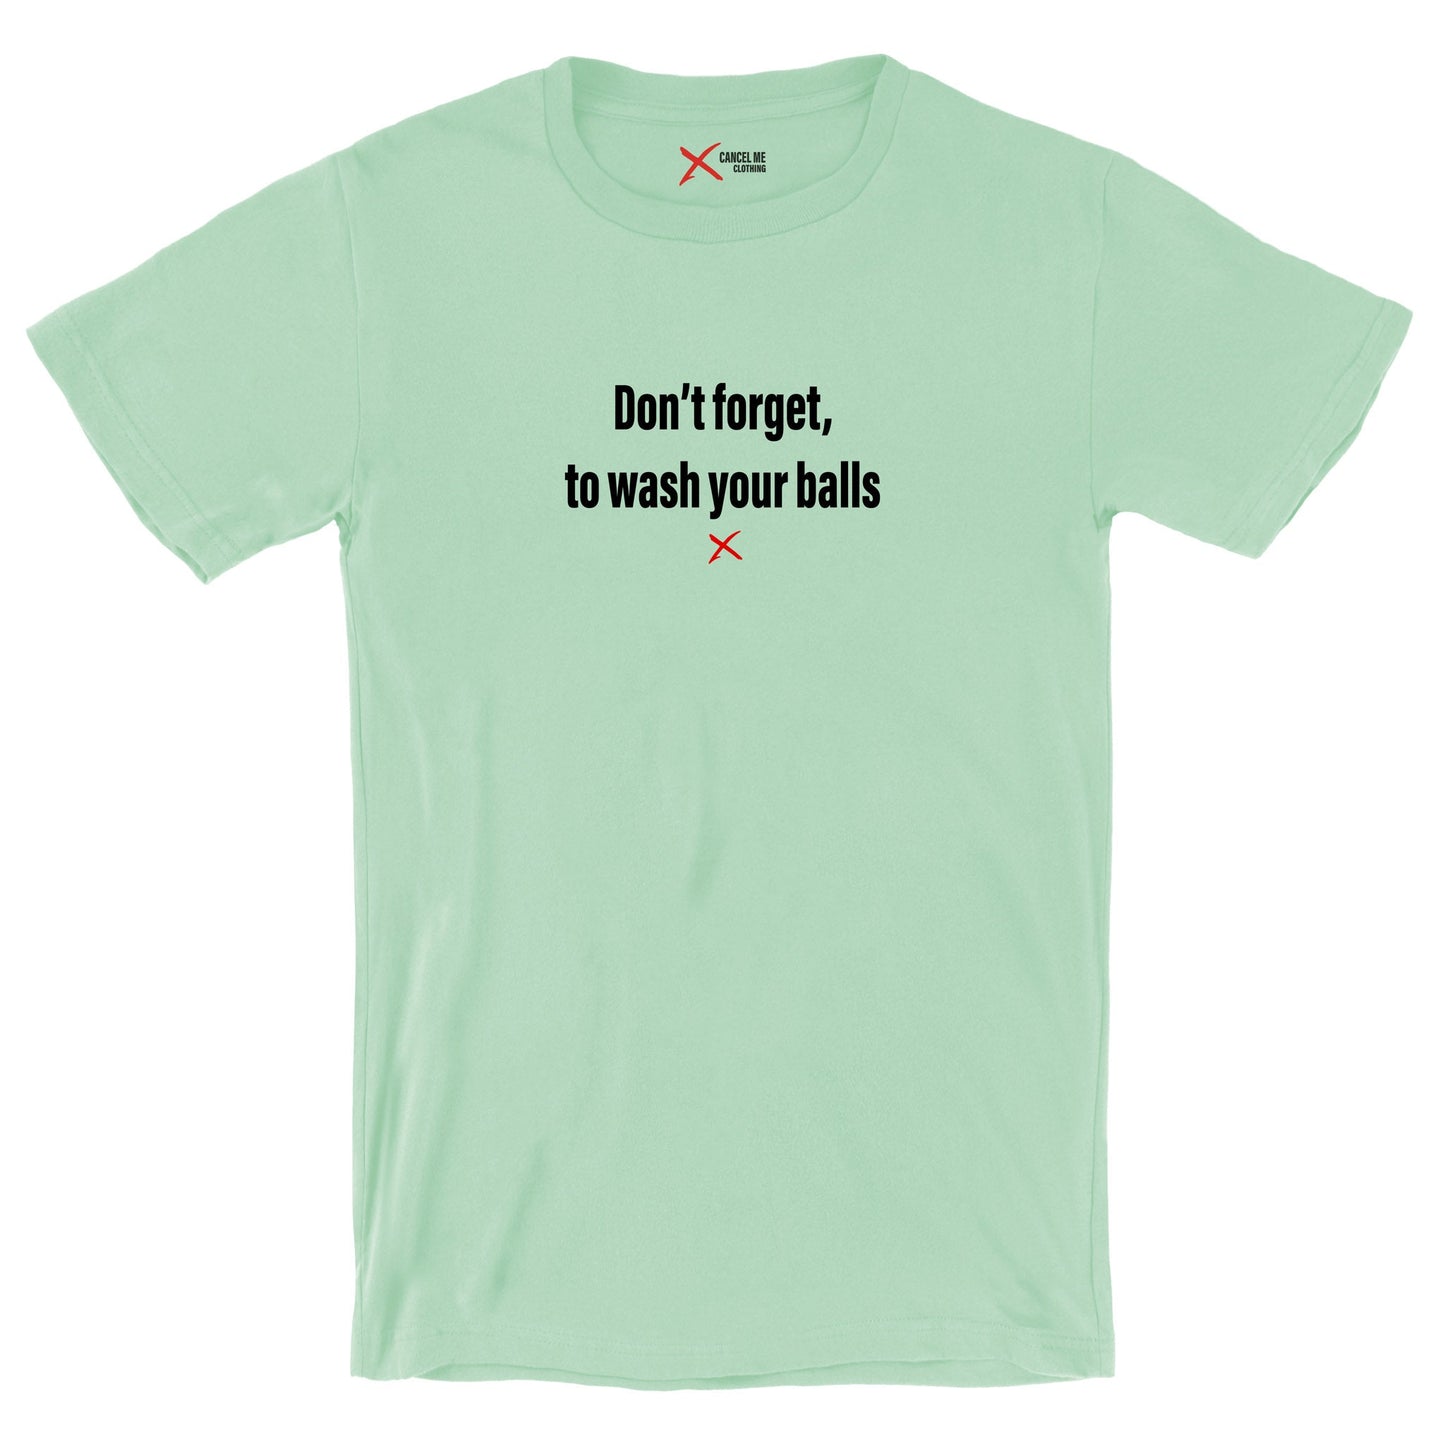 Don't forget, to wash your balls - Shirt